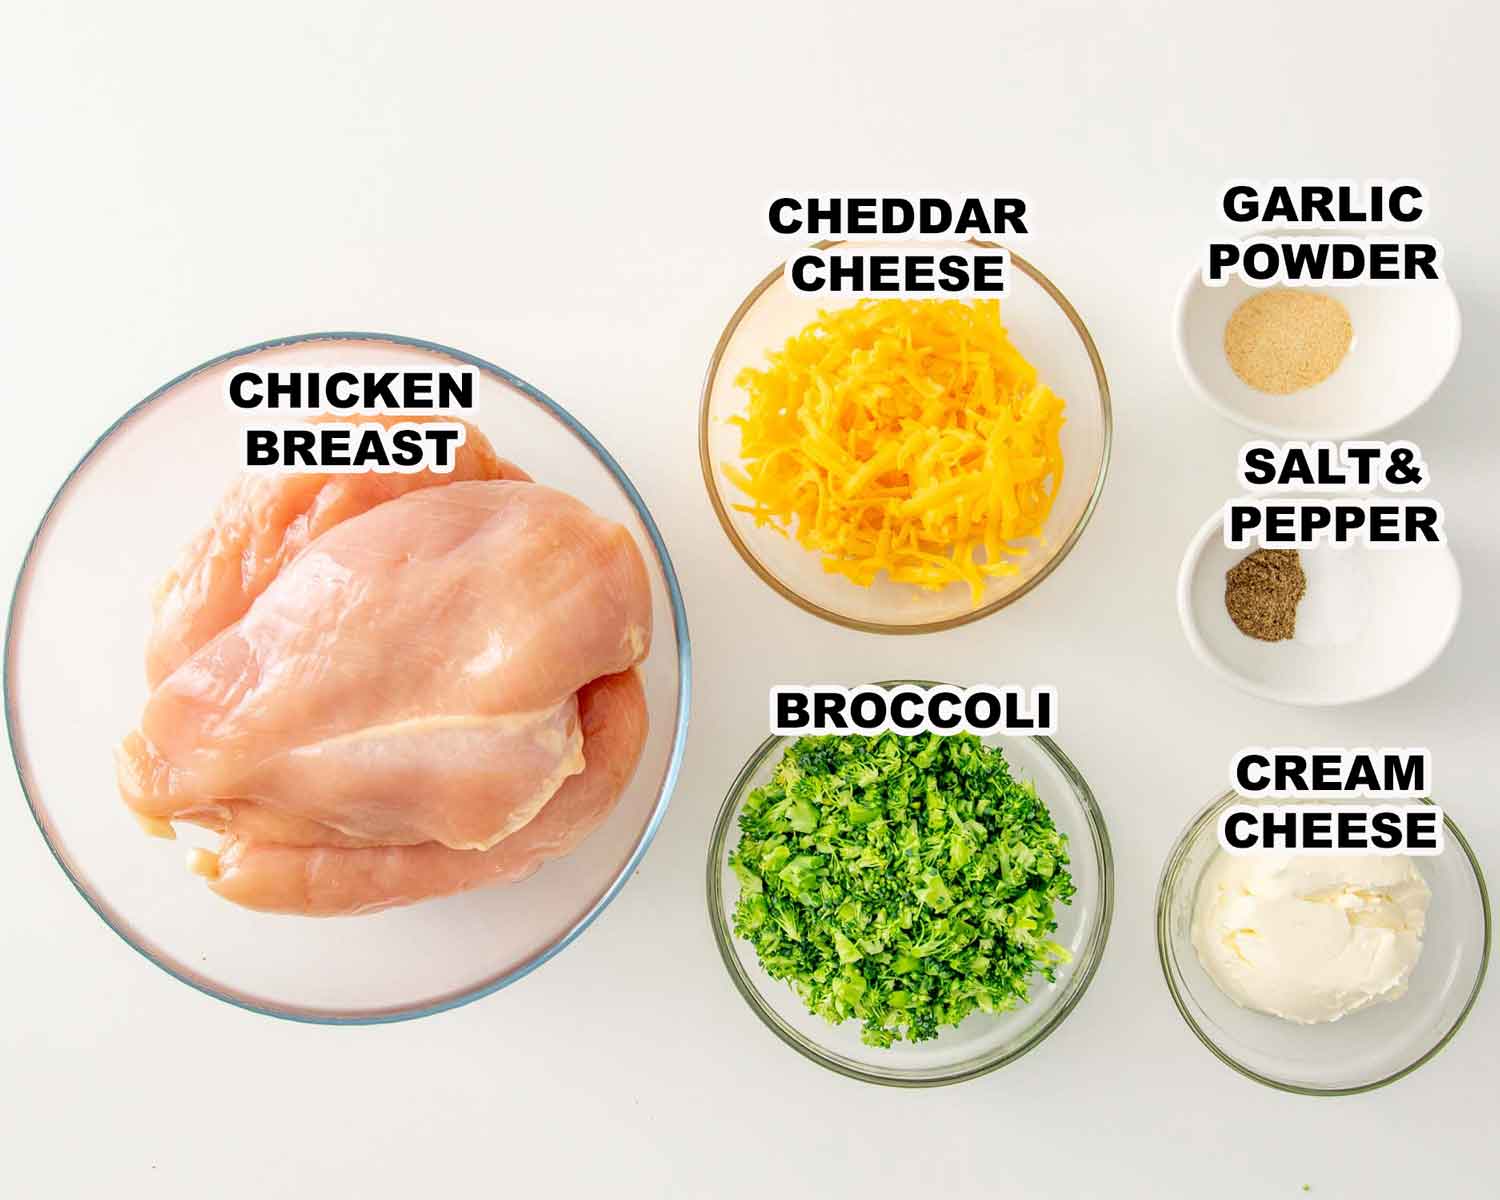 ingredients needed to make broccoli cheese stuffed chicken breasts.